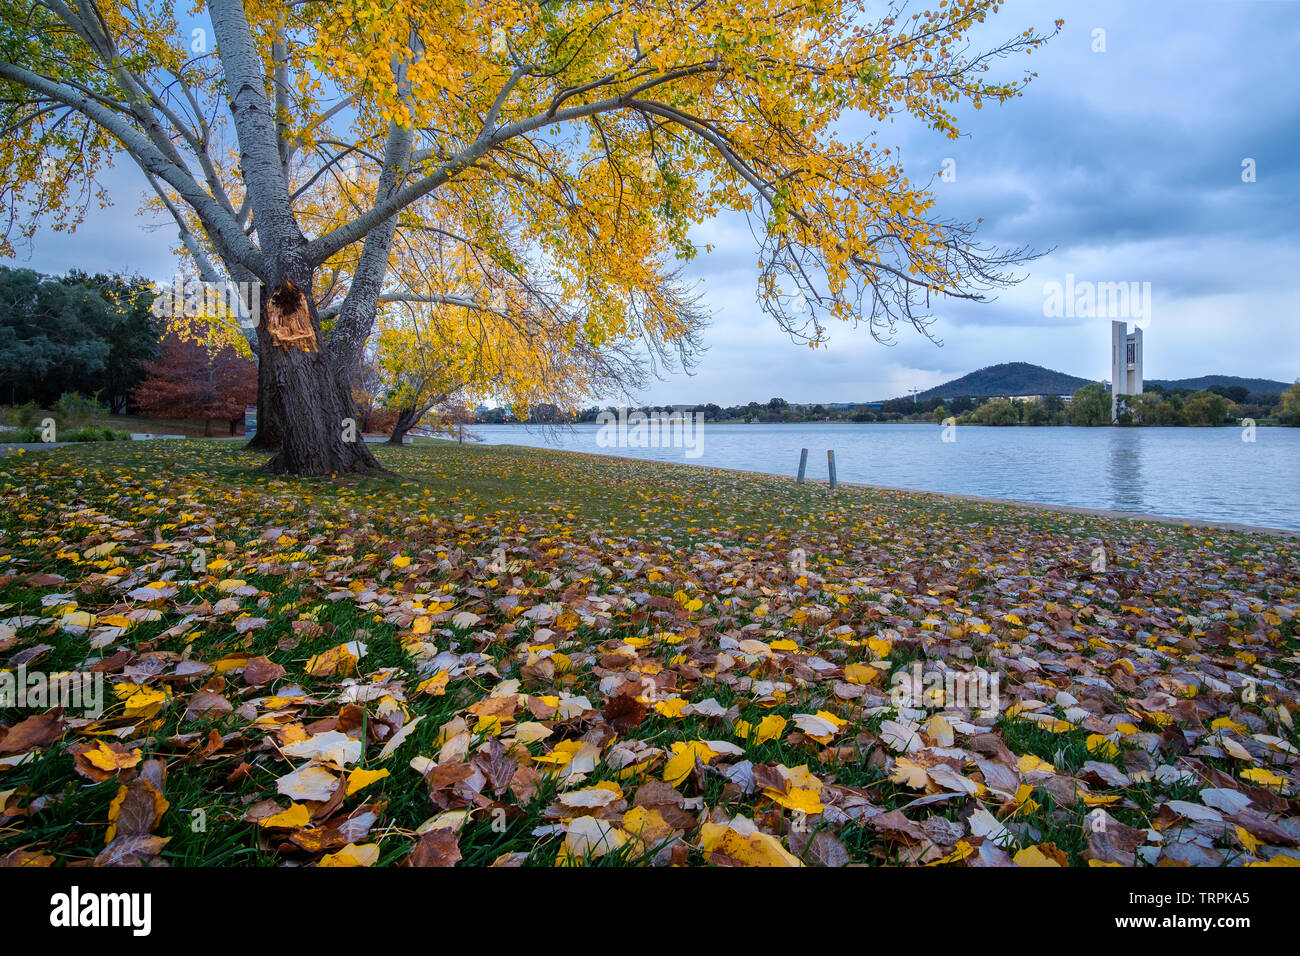 Autumn leaves on the ground by Lake Burley Griffin and Carillion Stock Photo